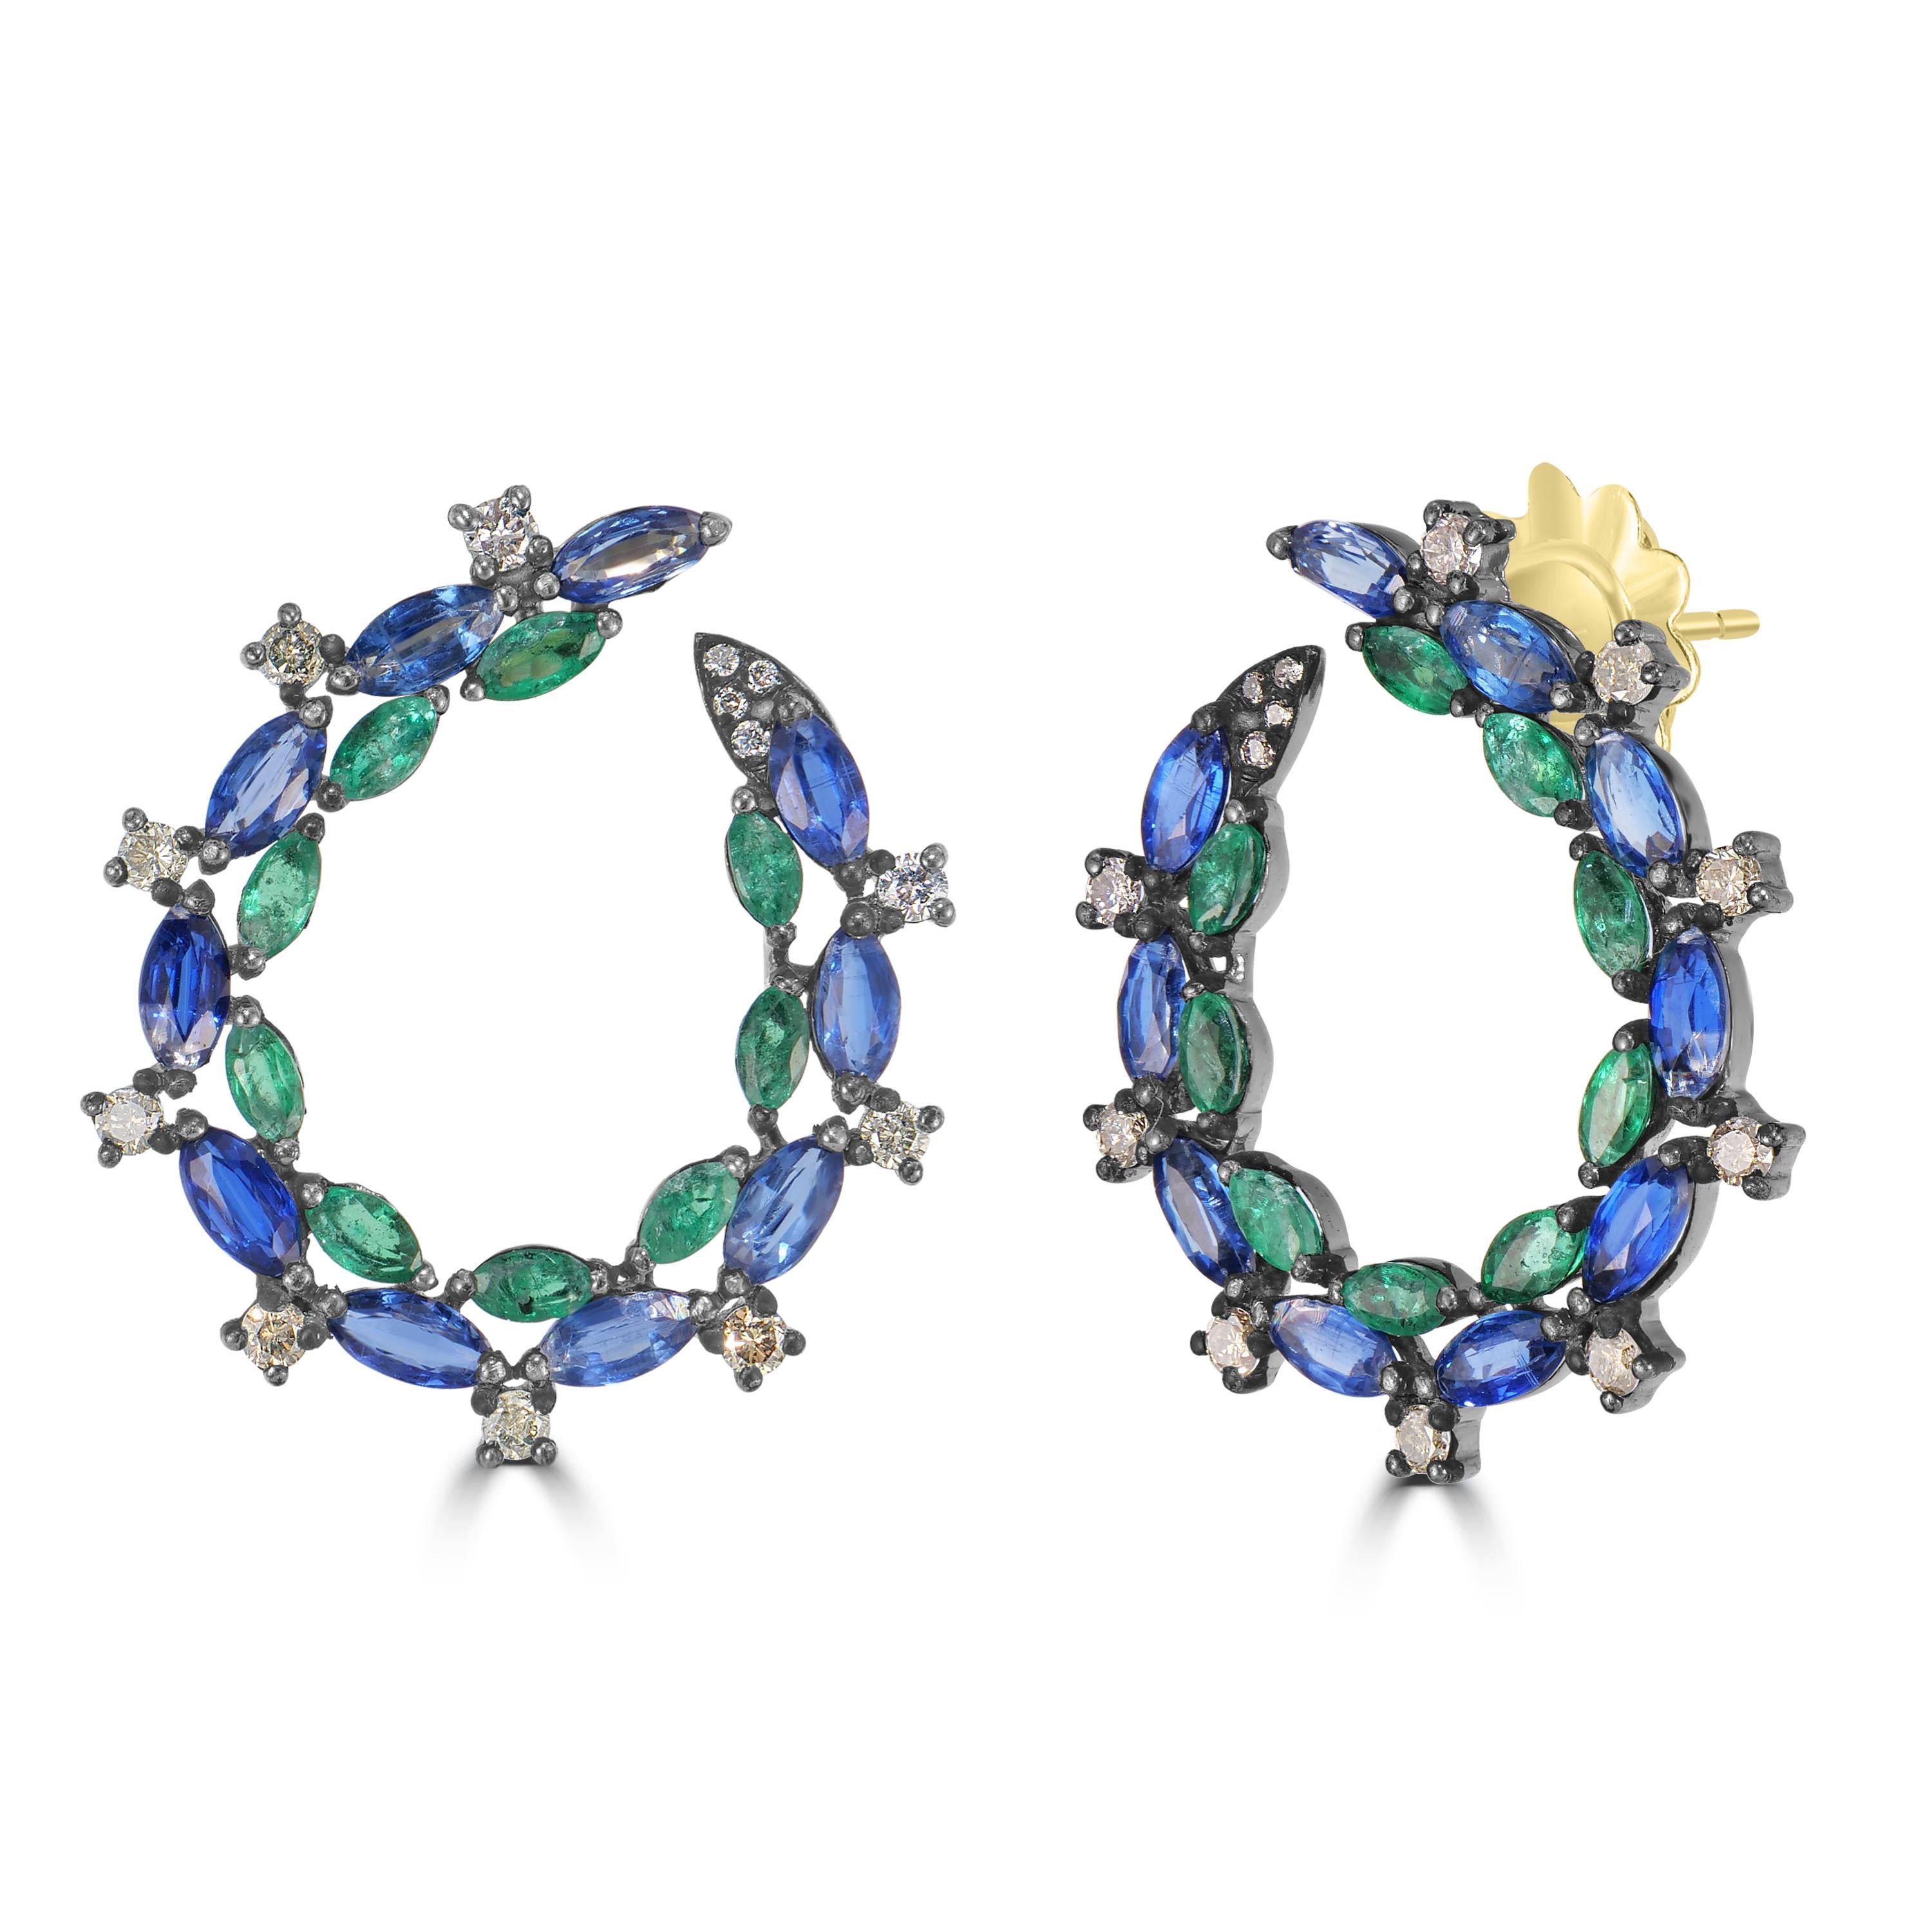 Introducing our Victorian 6.3 Cttw. Emerald, Kyanite, and Diamond Hoop Earrings – a mesmerizing blend of captivating gemstones and exquisite craftsmanship.

These hoop earrings redefine elegance with a unique design that showcases the arch in